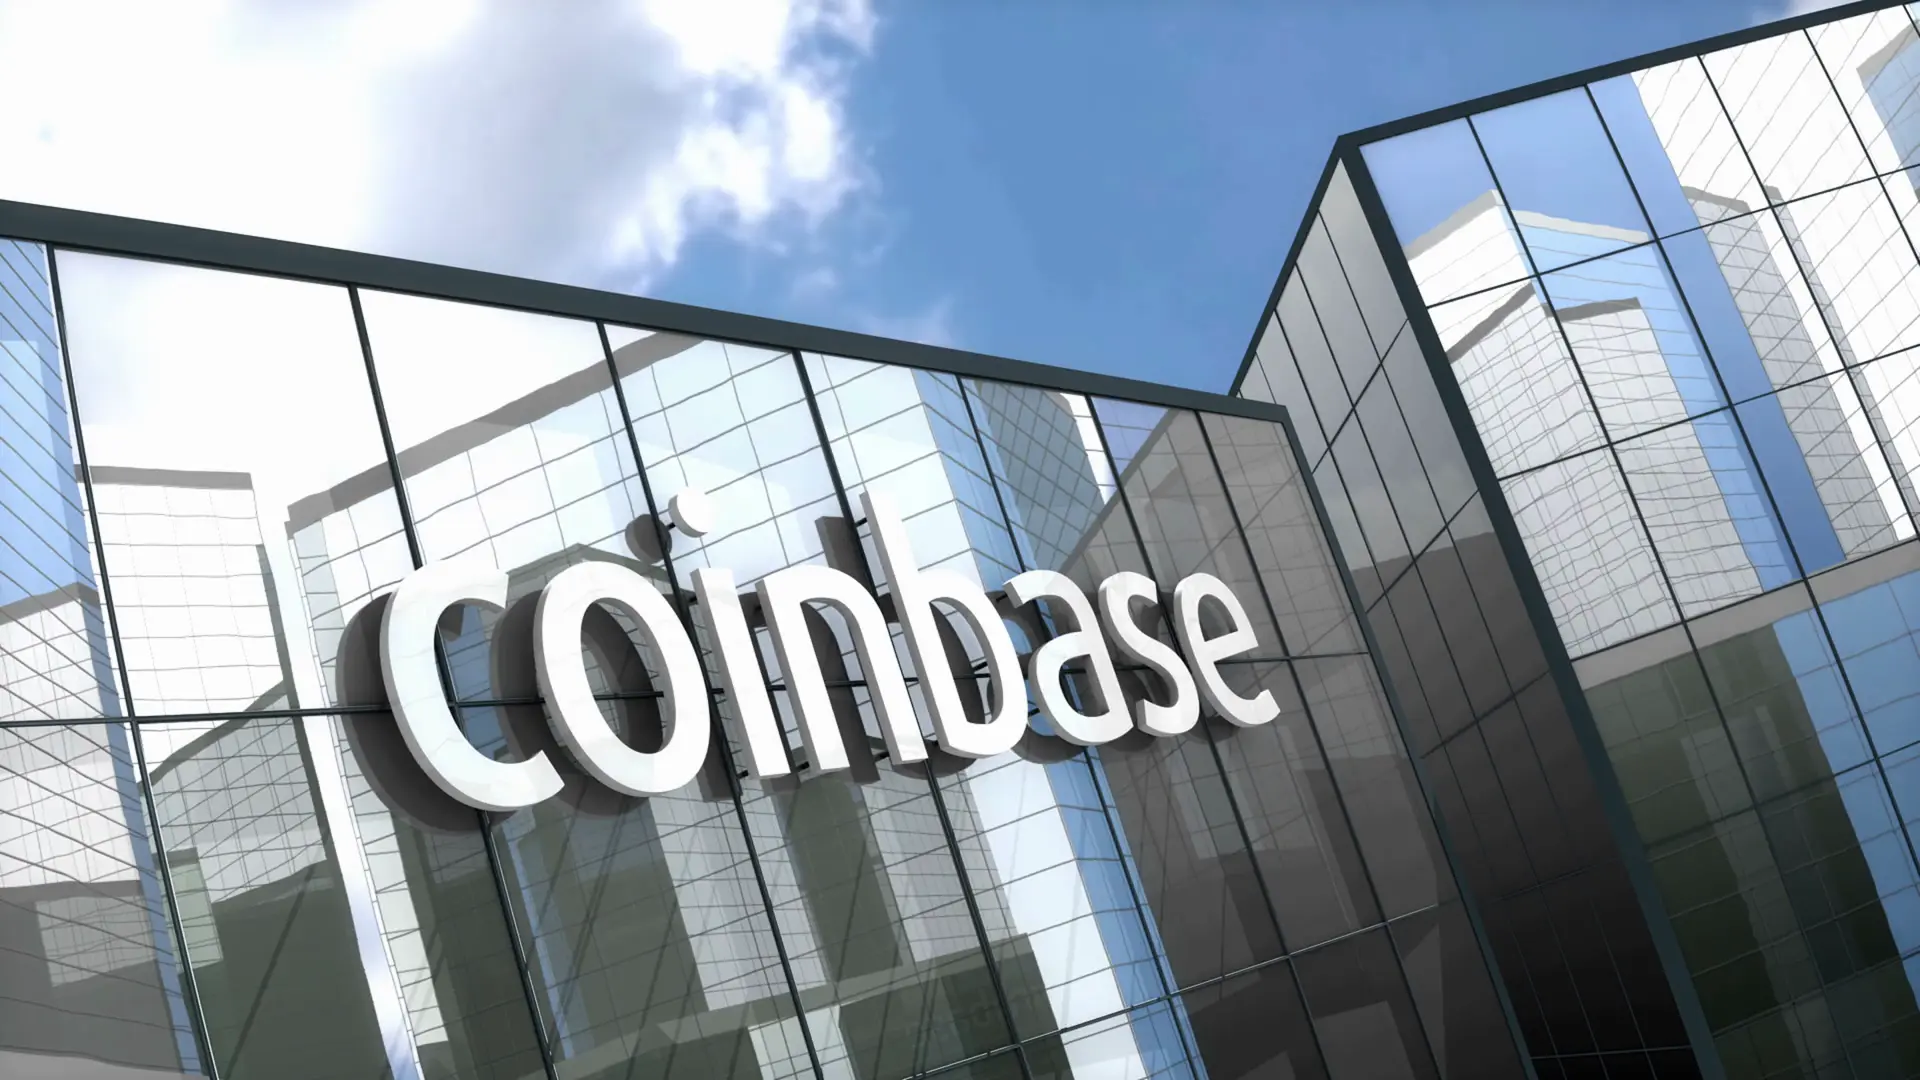 The Coinbase Wallet will delist four tokens, including Ripple, Ethereum Classic, and Bitcoin Cash.